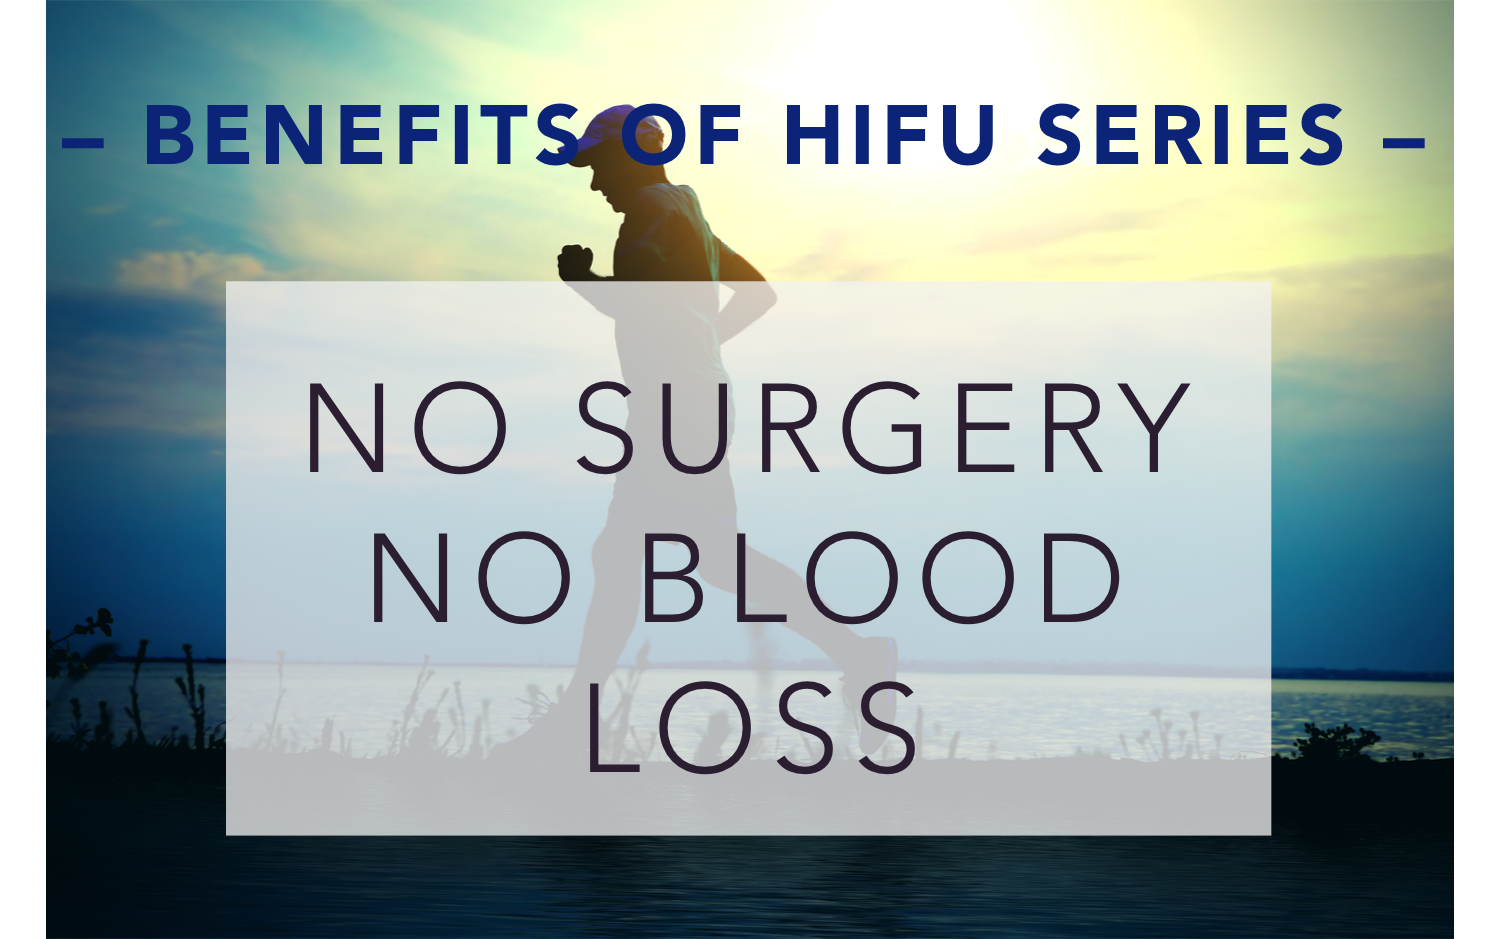 HIFU is non surgical treatment for prostate cancer with no blood loss.